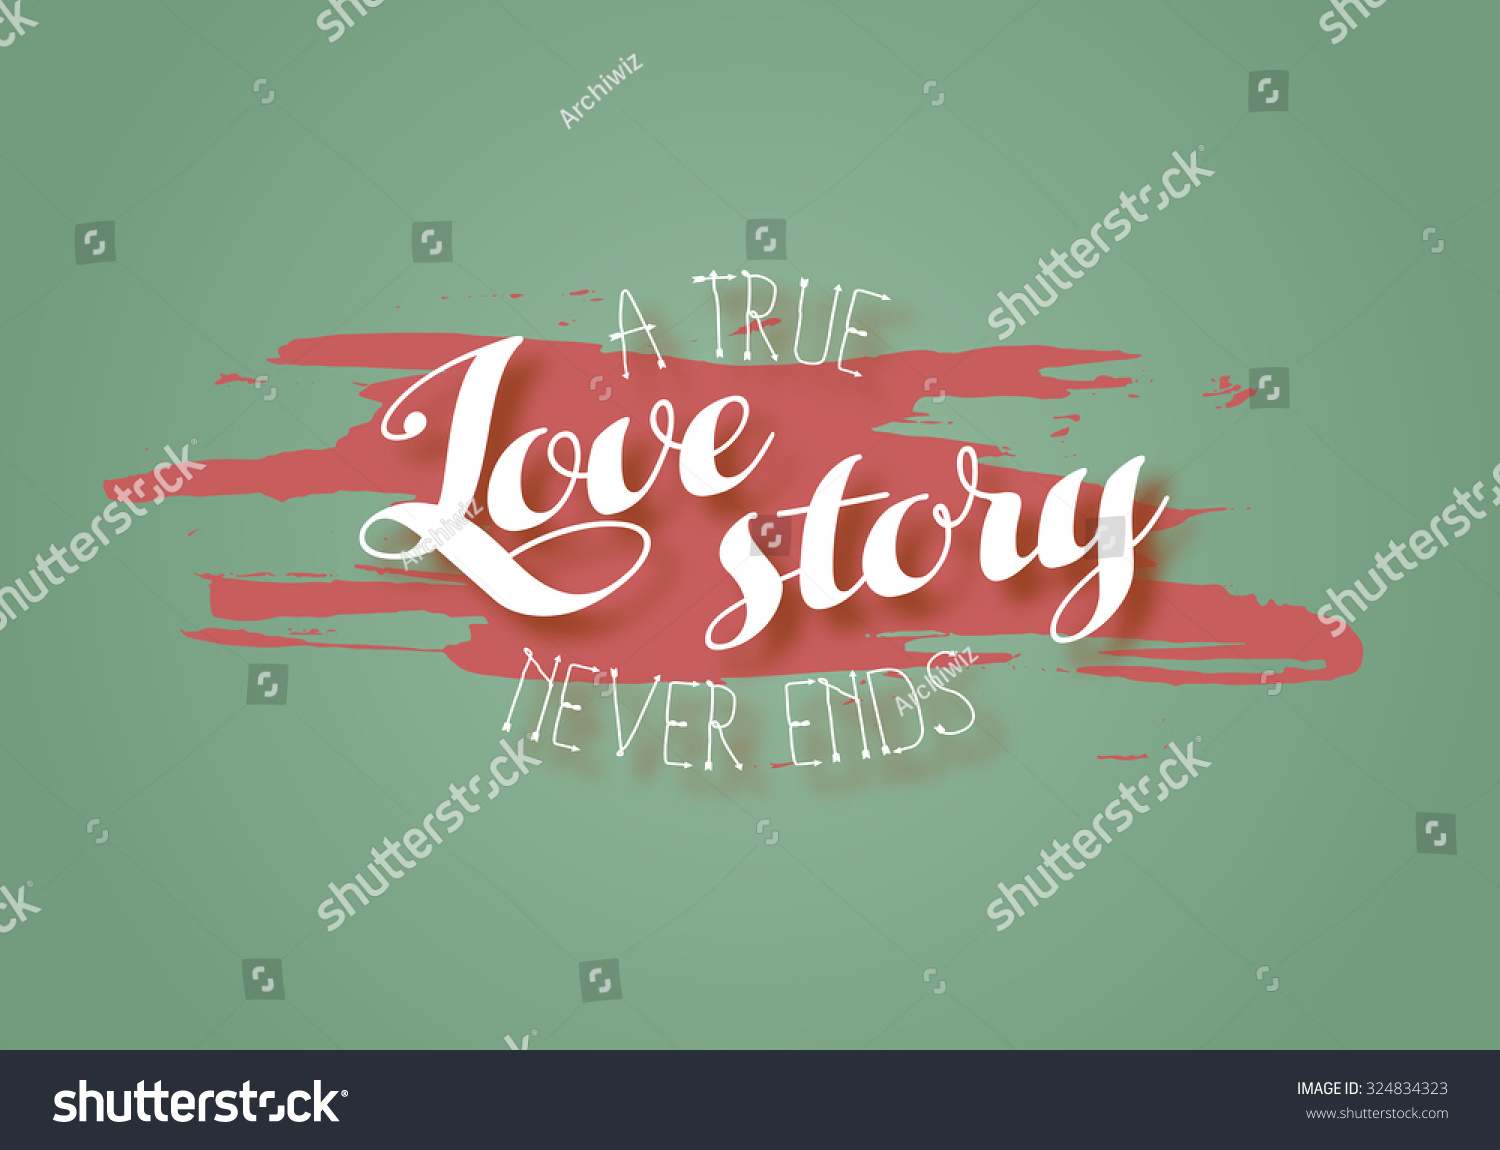 "A true love story never ends" motivational quote Typographical valentines background Vector "